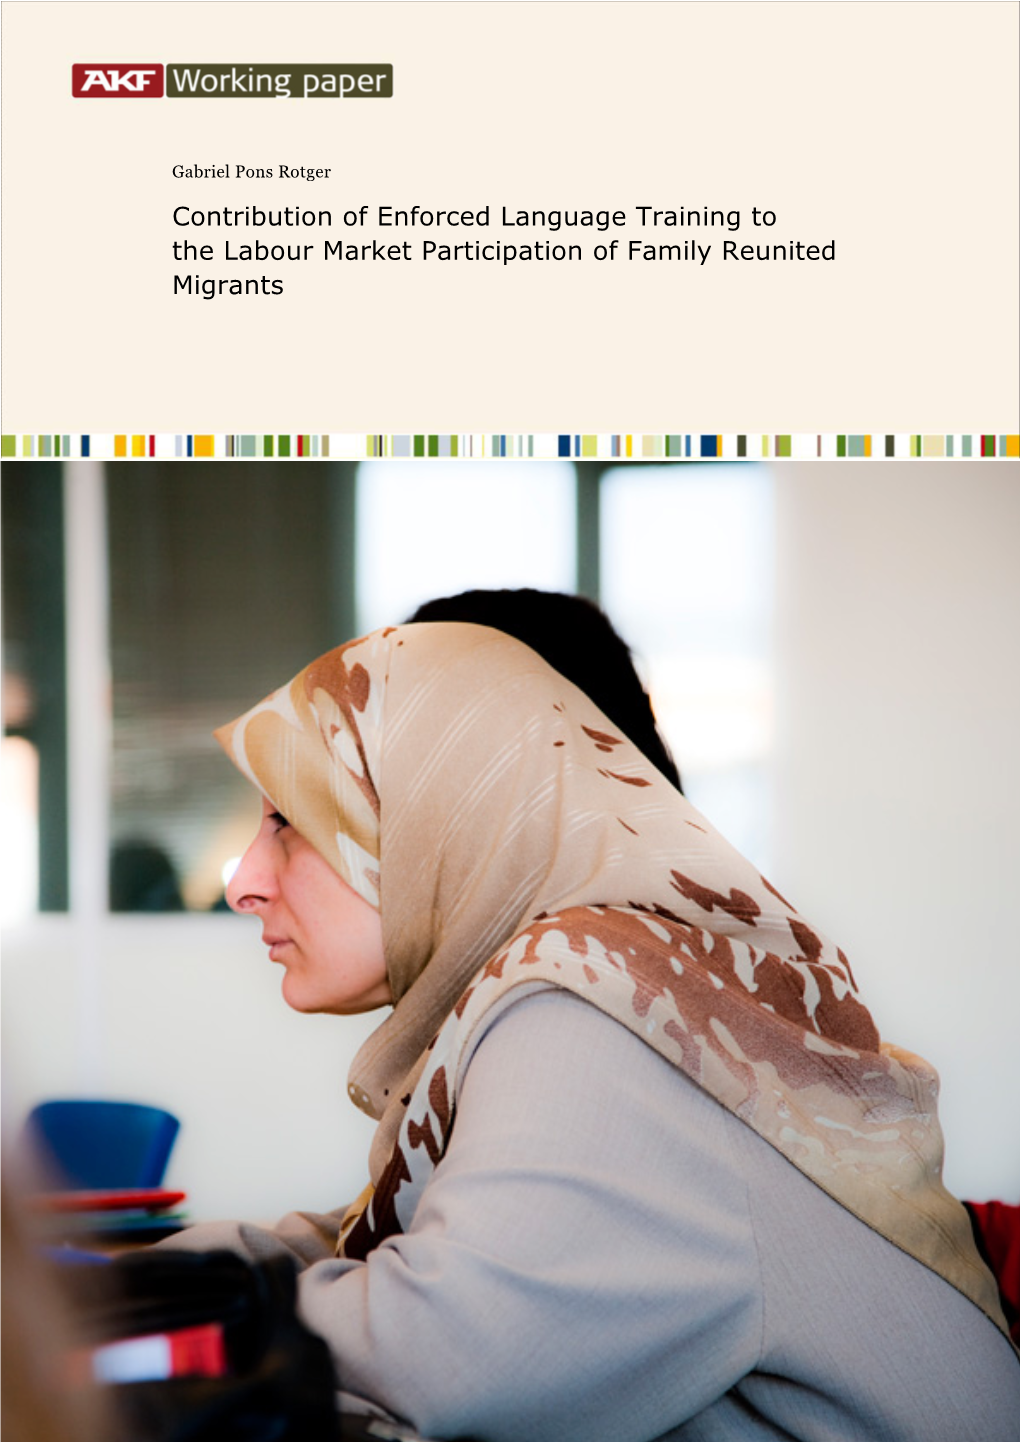 Contribution of Enforced Language Training to the Labour Market Participation of Family Reunited Migrants